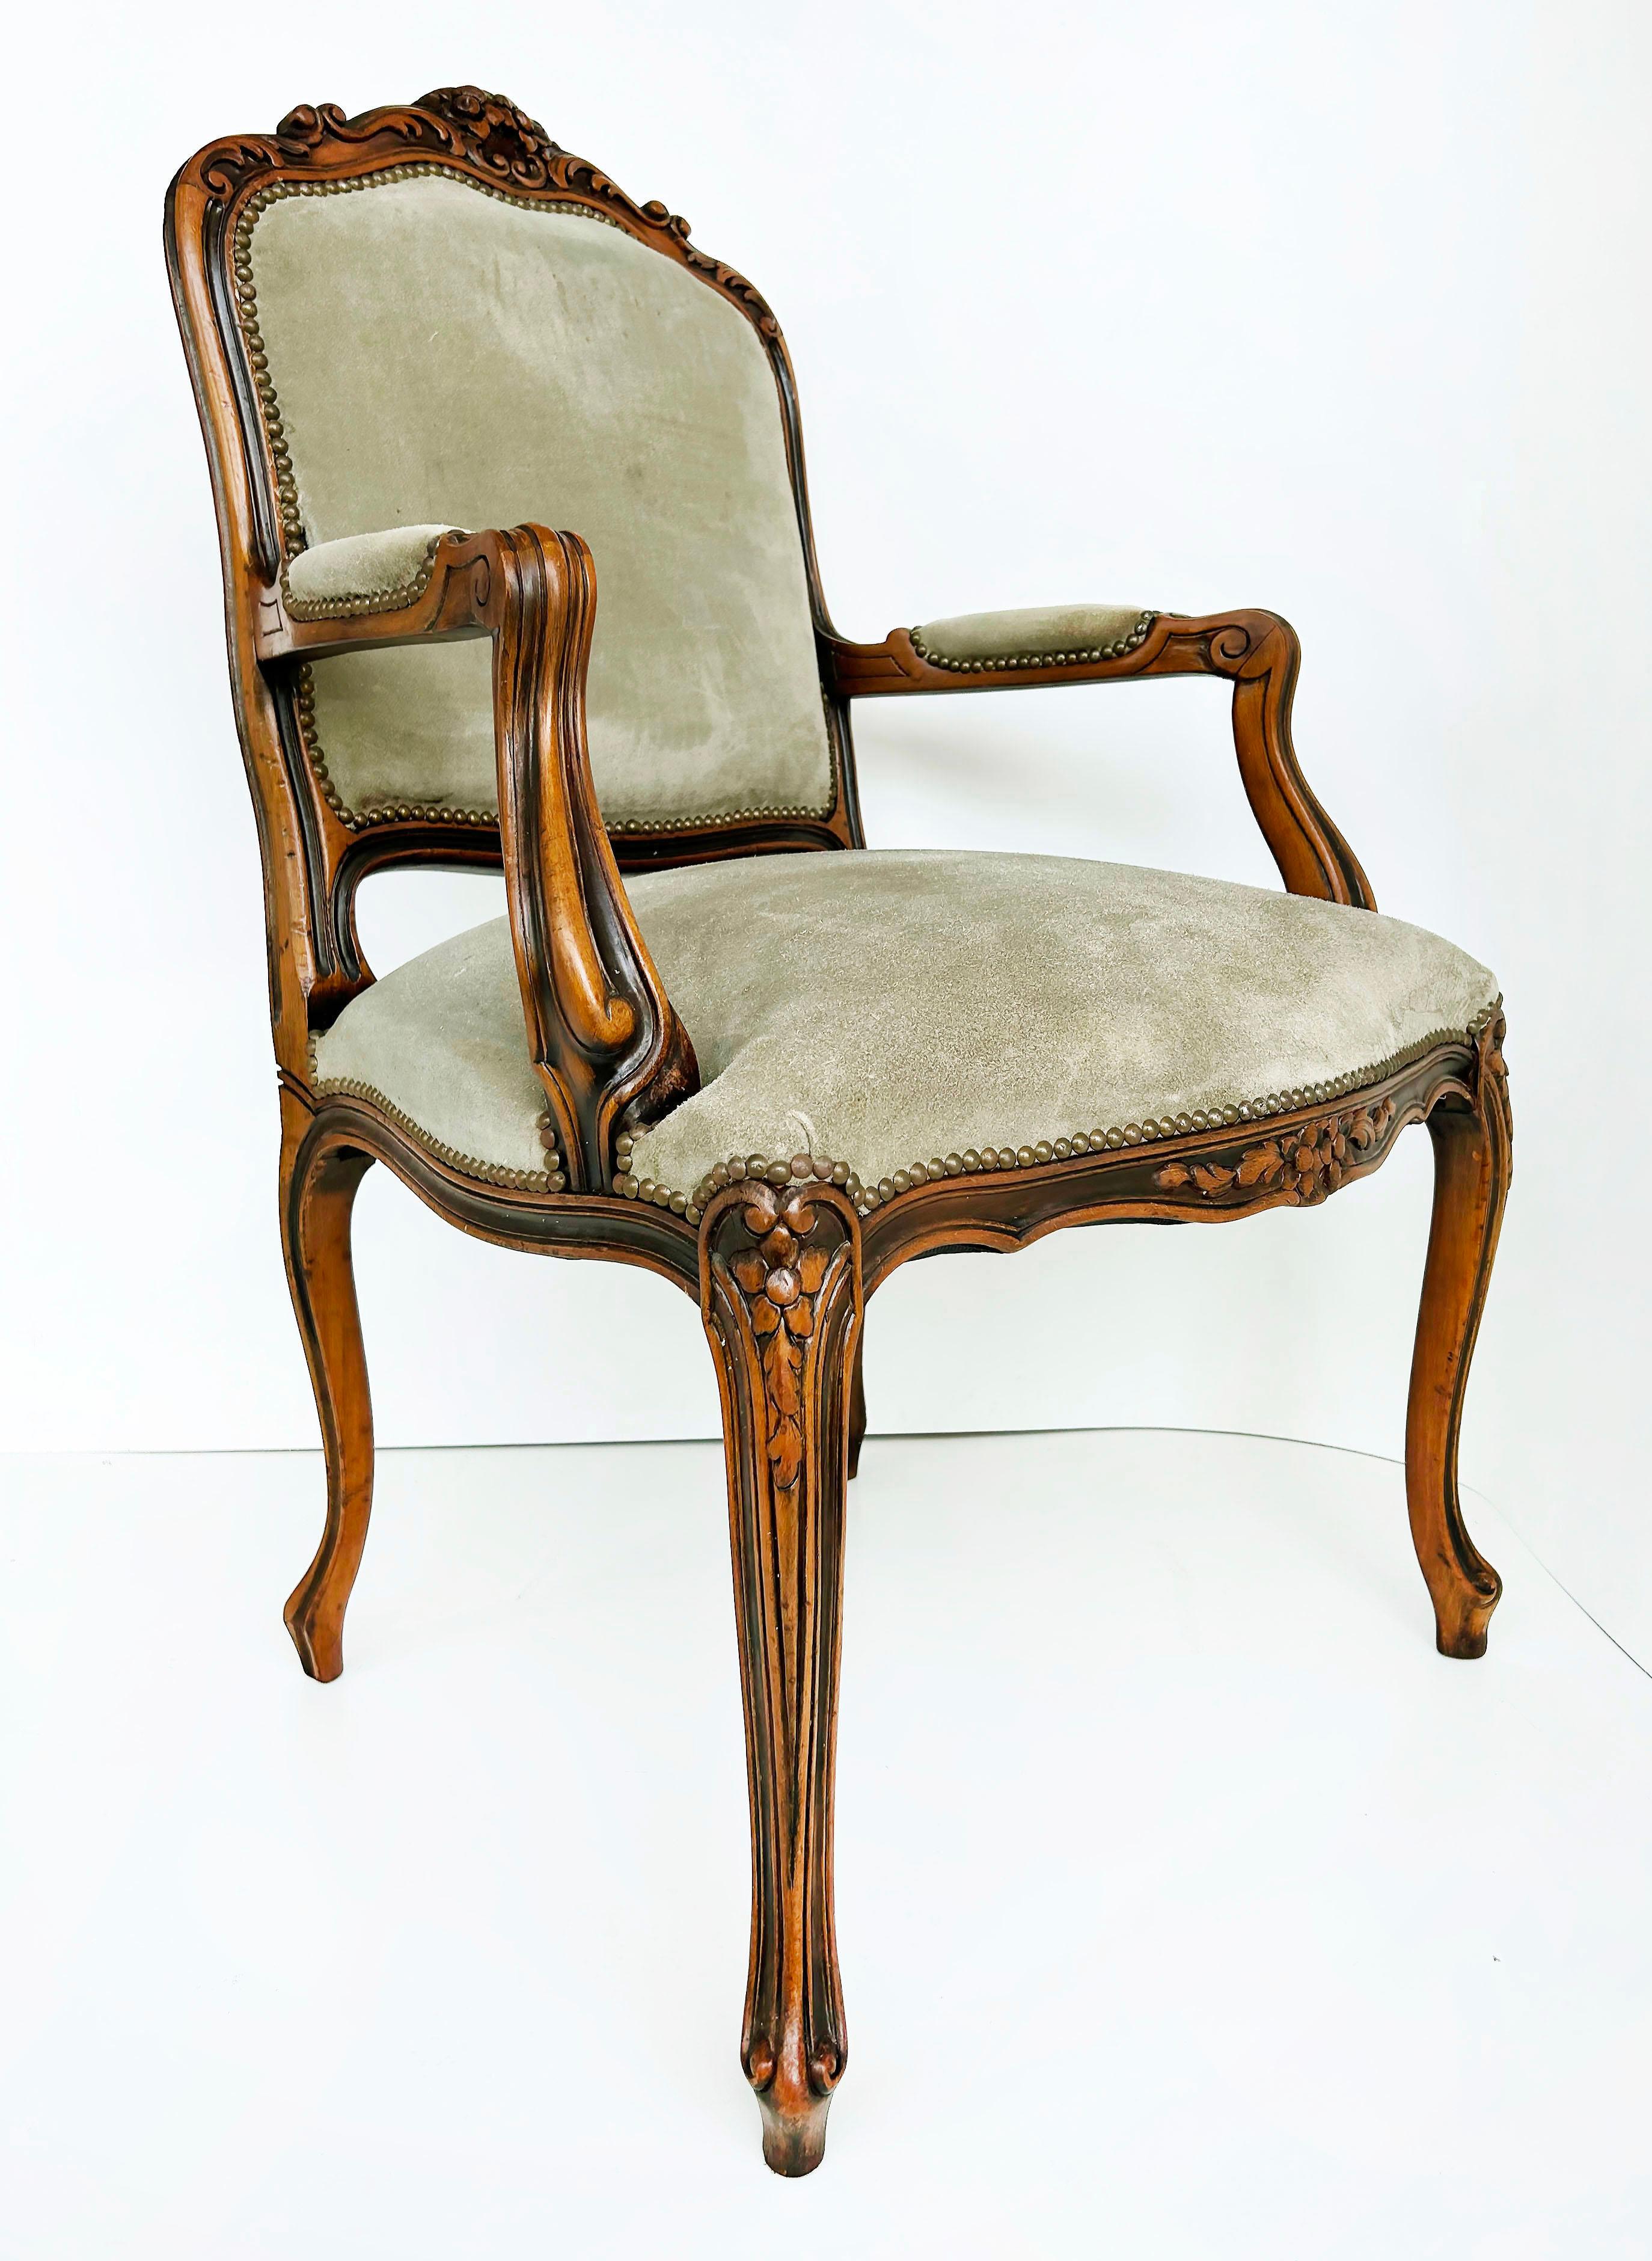 Italian Chateau d'Ax Carved Armchairs in Suede with Brass NailHeads, Pair In Good Condition For Sale In Miami, FL